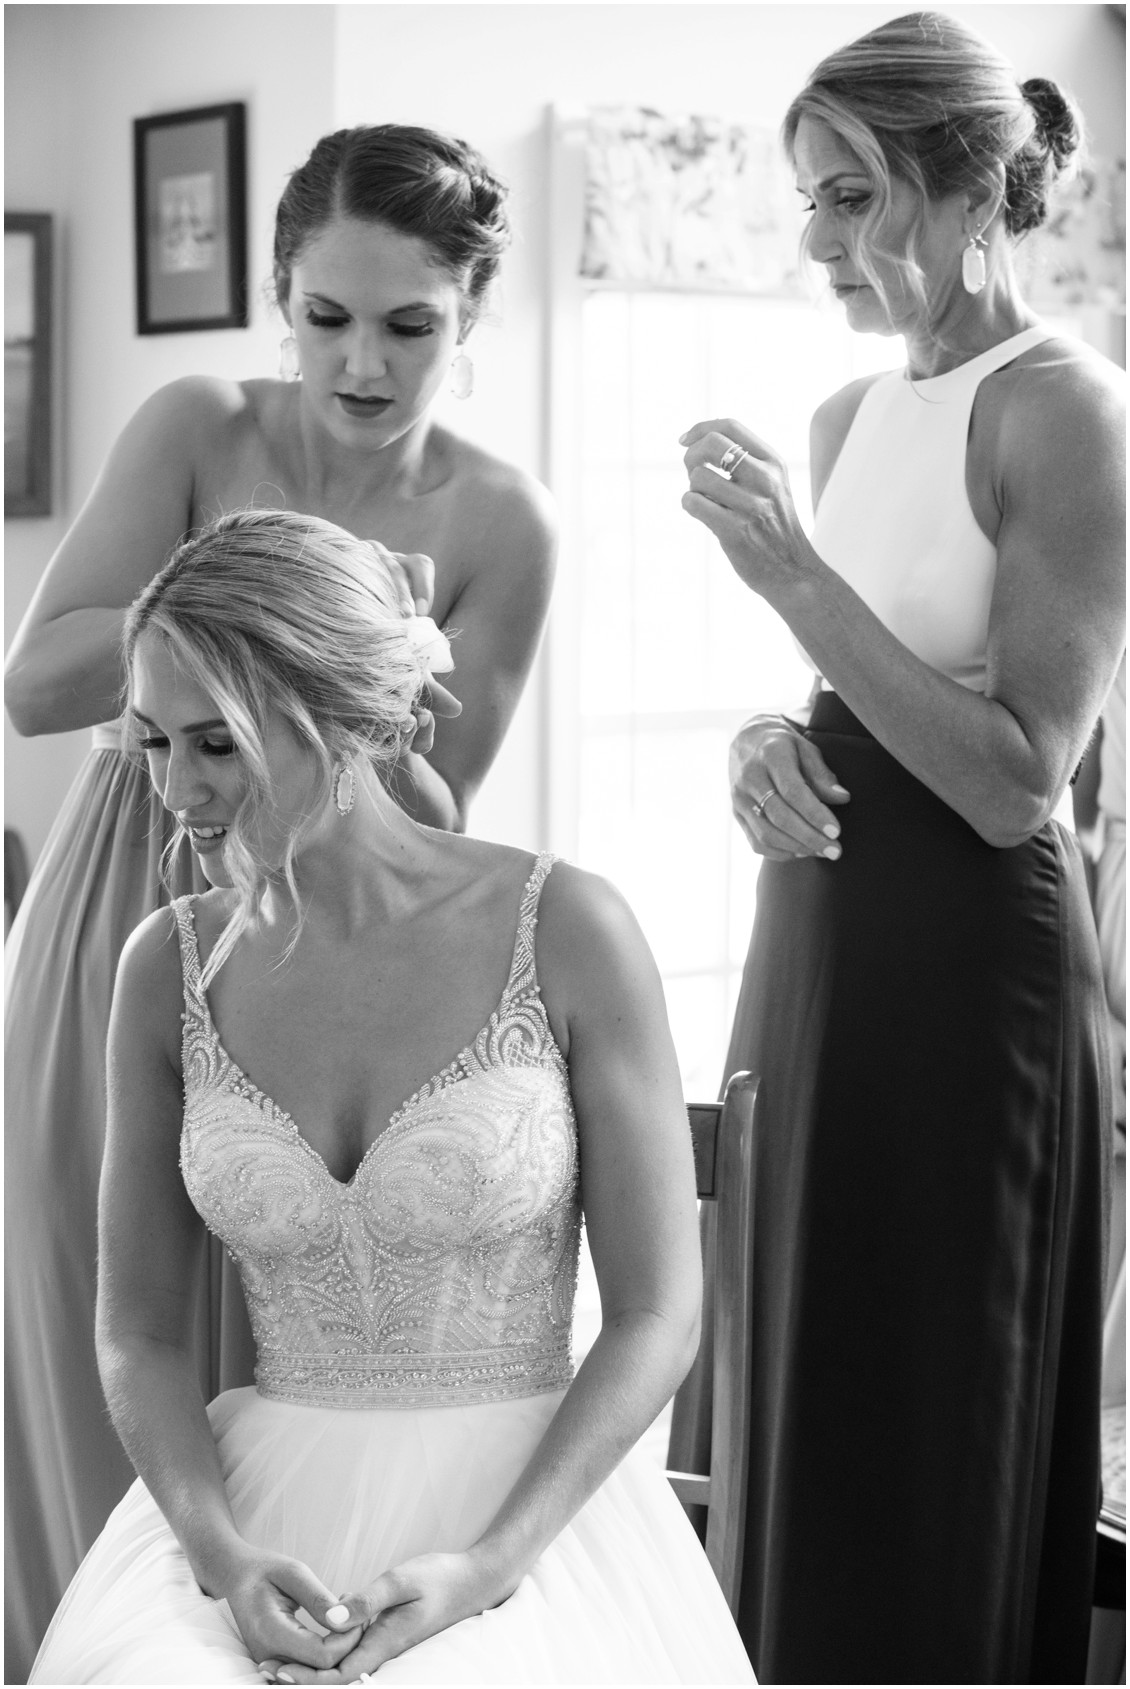 Eastern Shore Wedding bride getting ready at the Hambleton Inn bed and breakfast in St. Michaels, MD shot by Melissa Grimes-Guy Photography